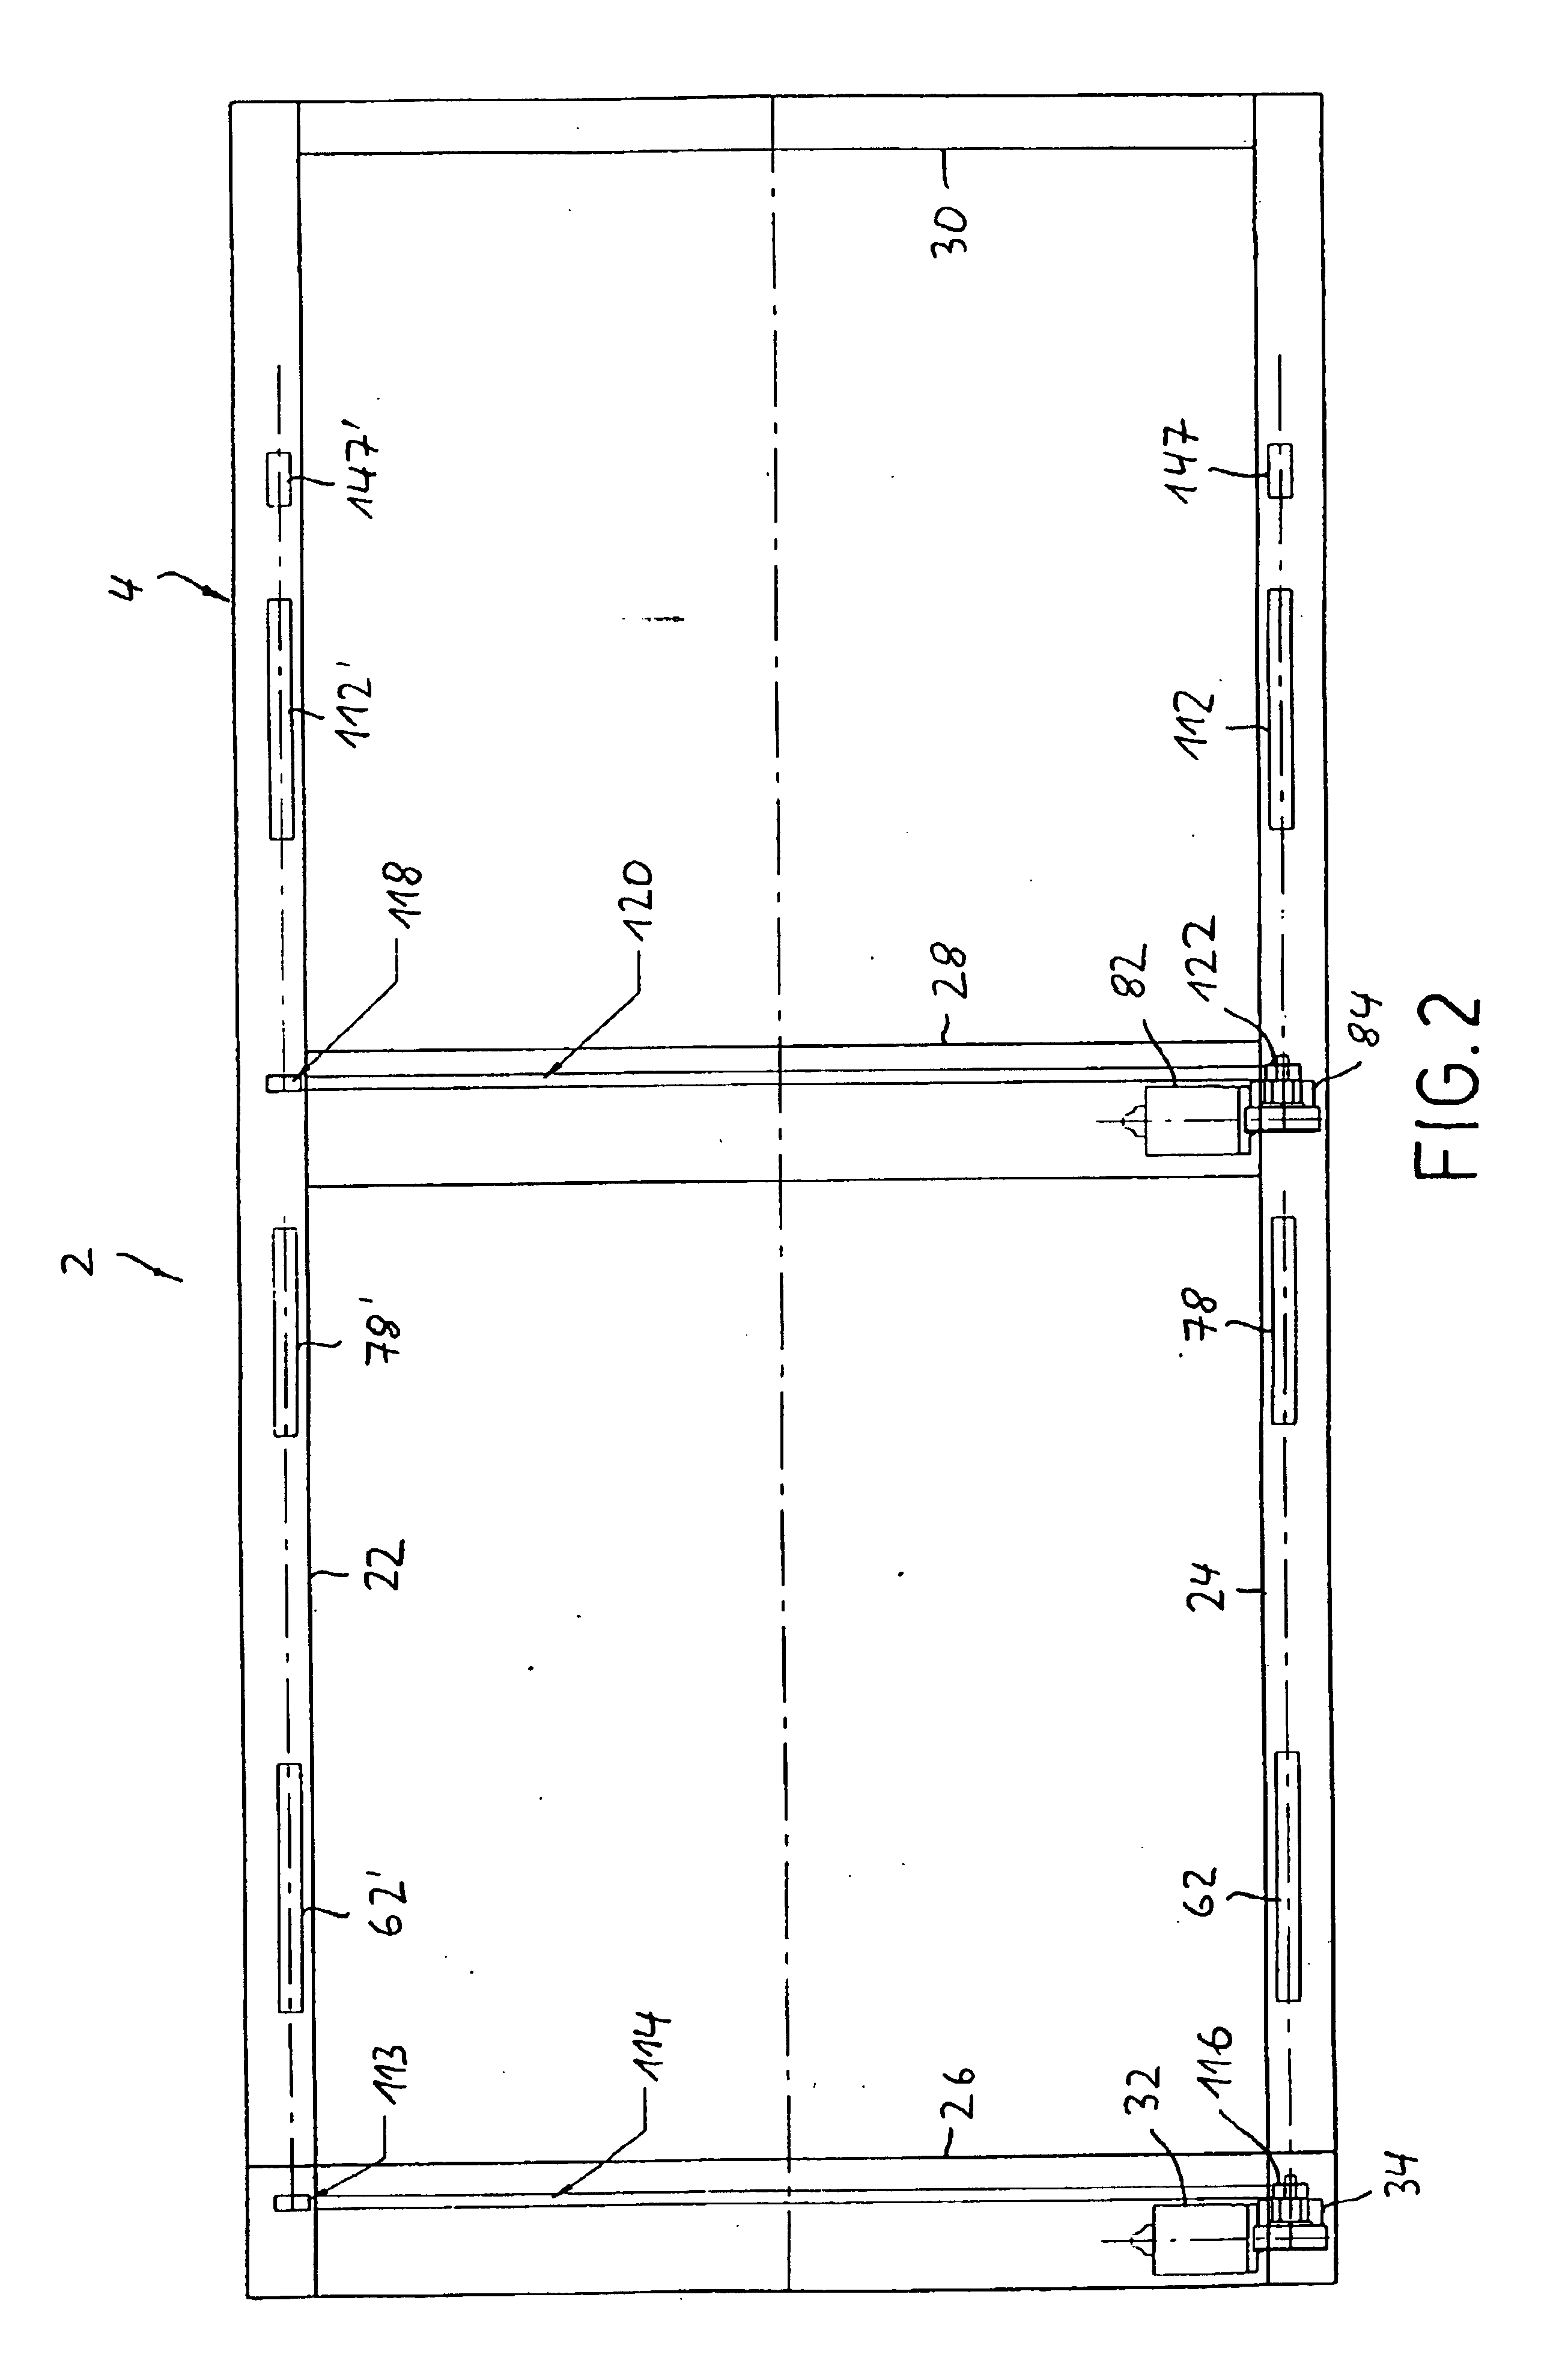 Motor adjustable support device for the upholstery of a seat and/or reclining furniture